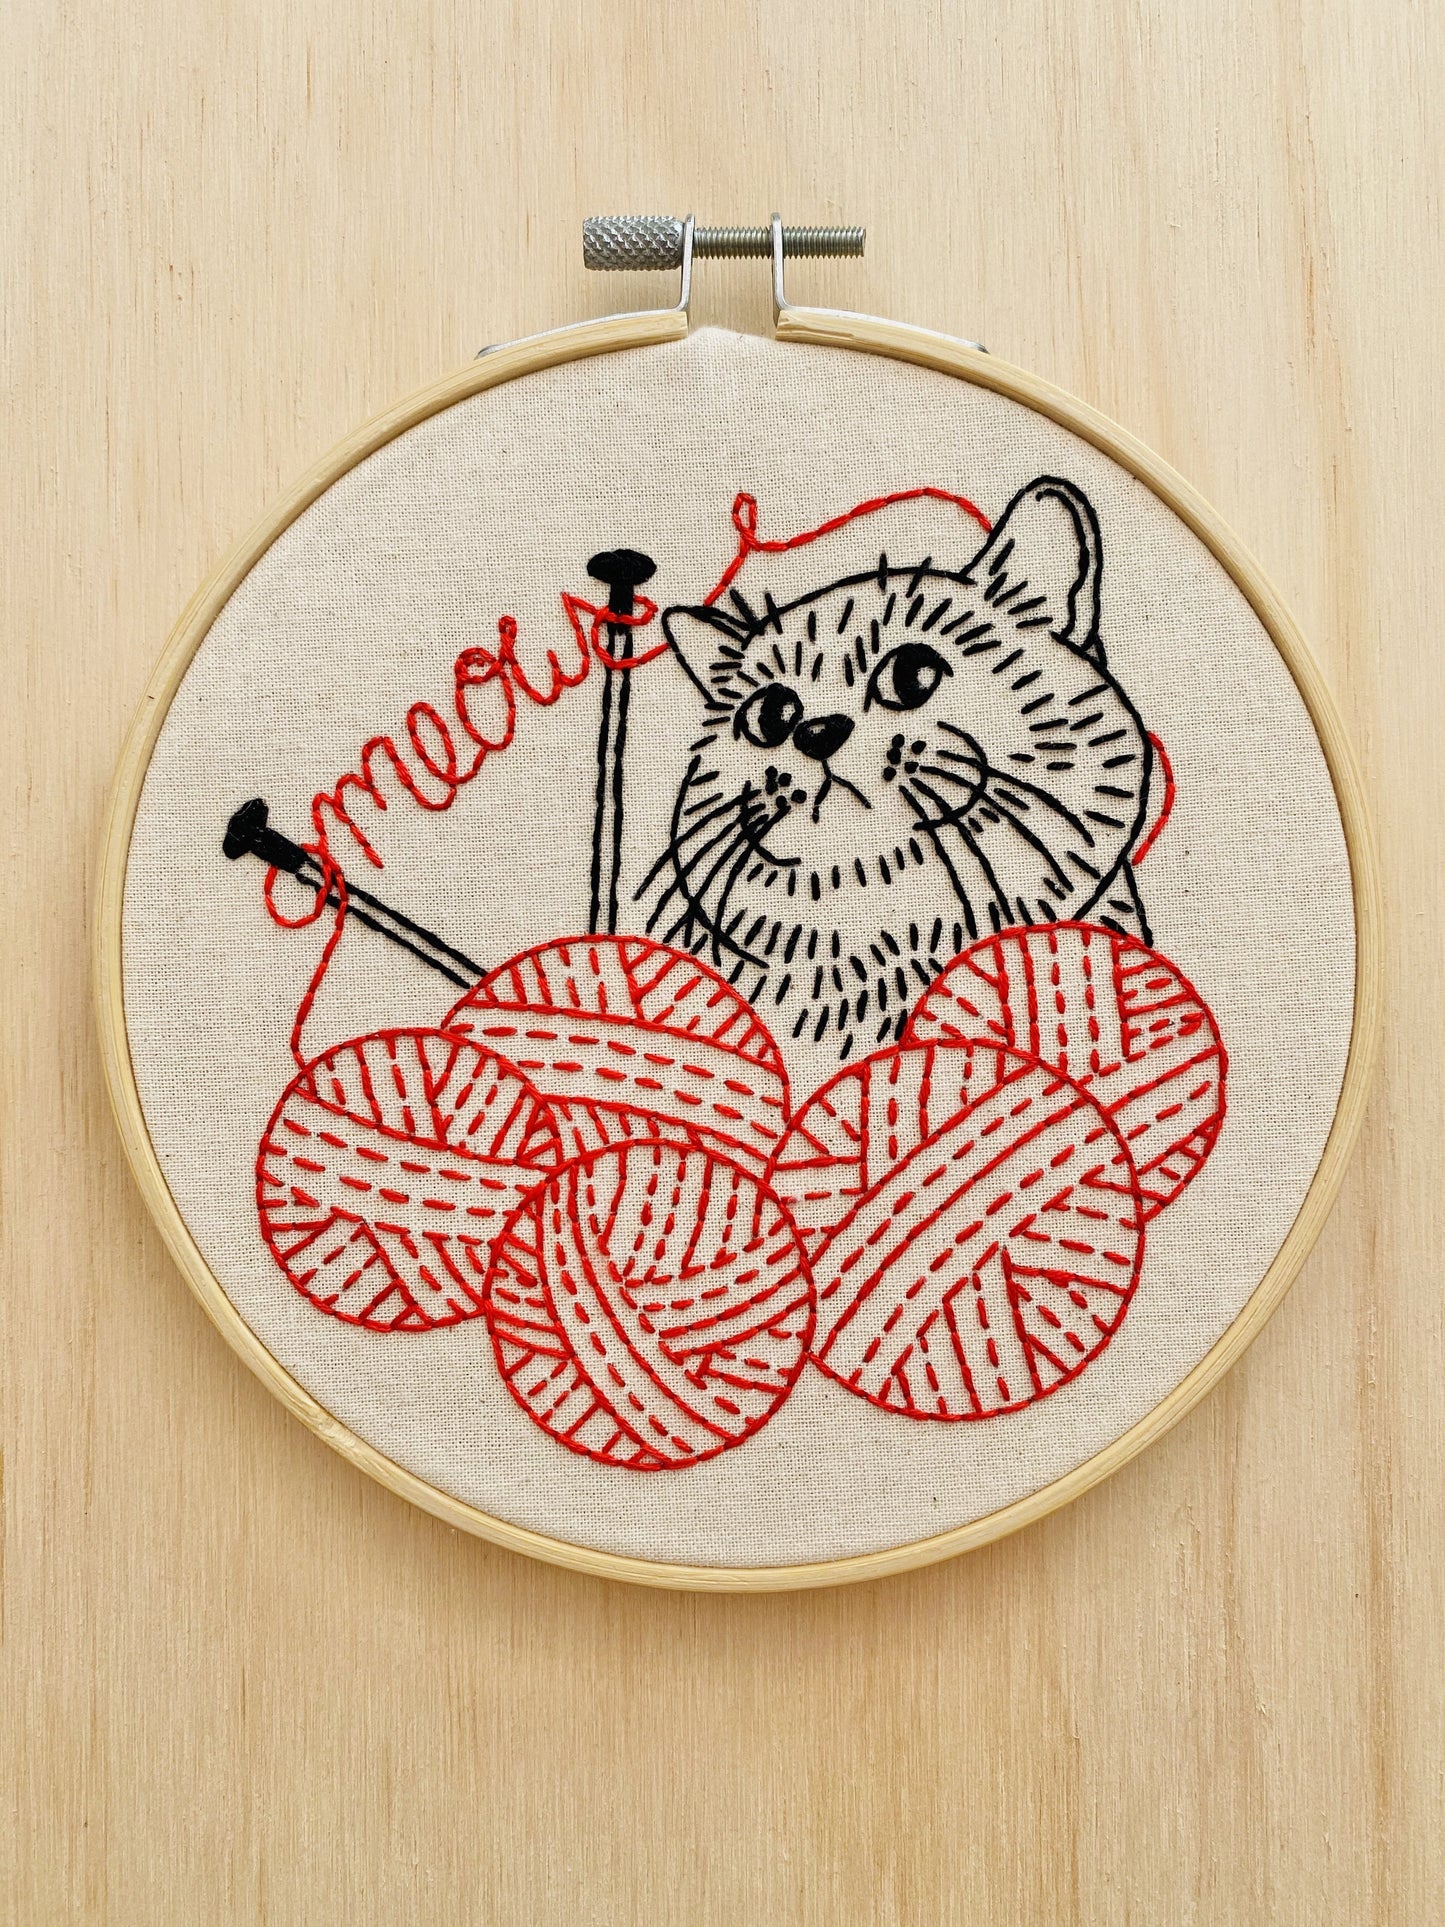 Kitten With Knitting Complete Embroidery Kit